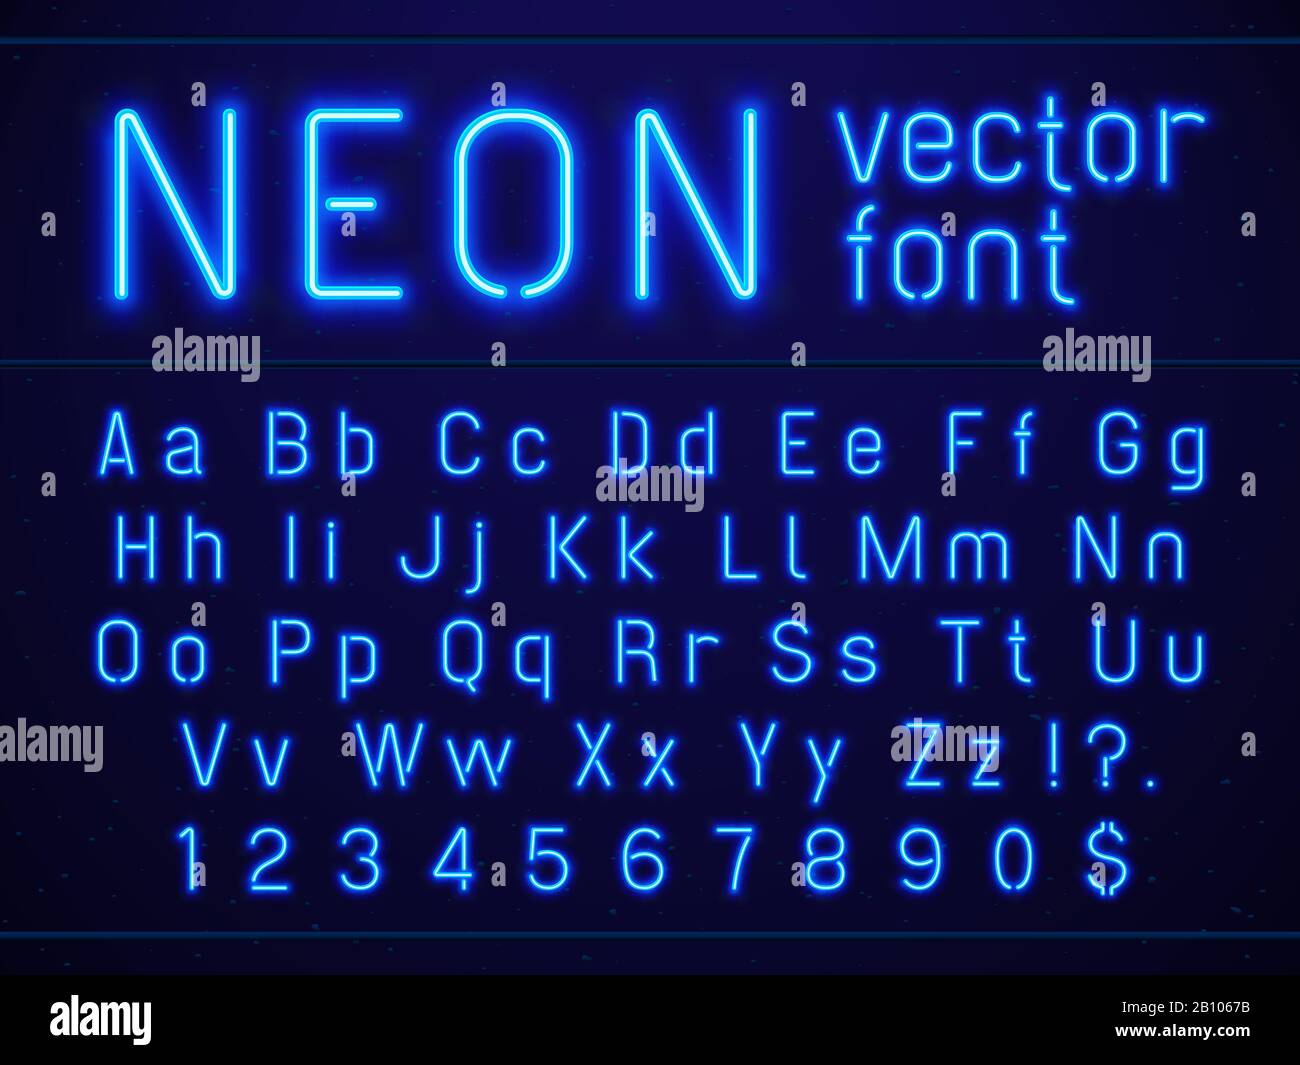 Bright Glowing Blue Neon Alphabet Letters And Numbers Font Nightlife Entertainments Modern Bars Casino Illuminated Vector Signs Stock Vector Image Art Alamy